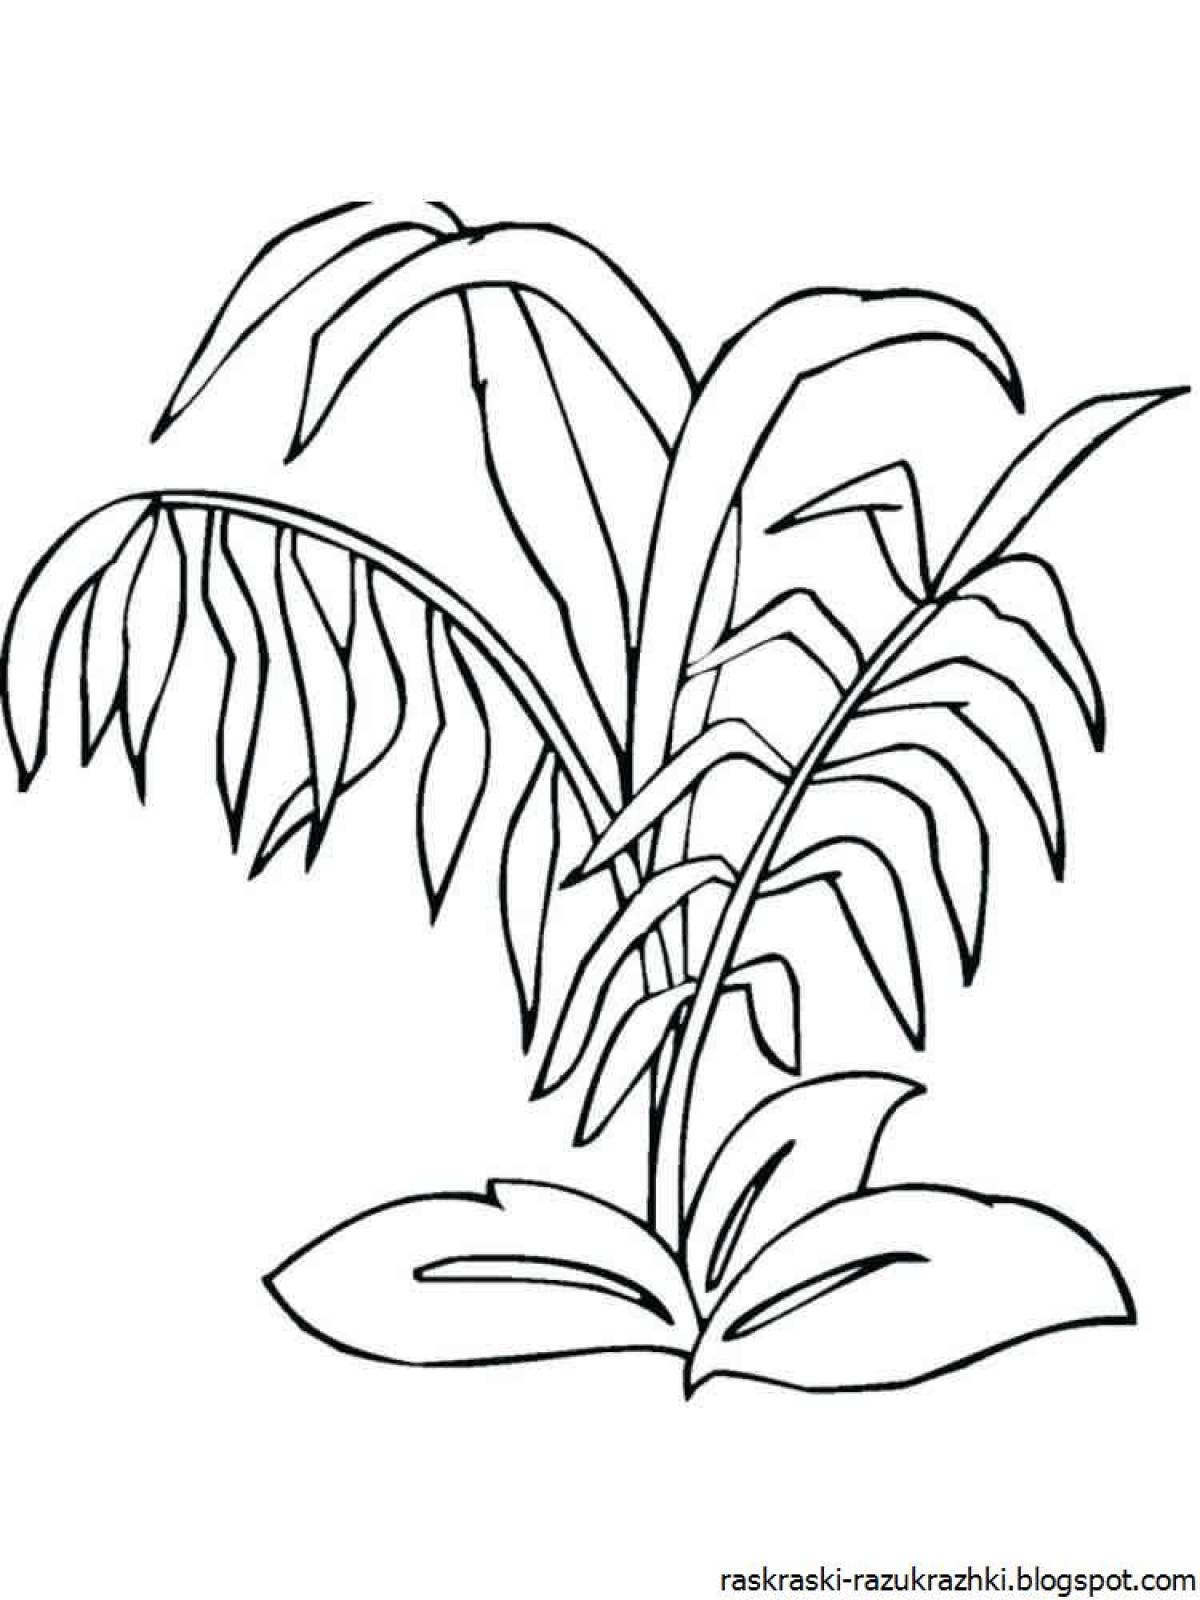 Plant coloring